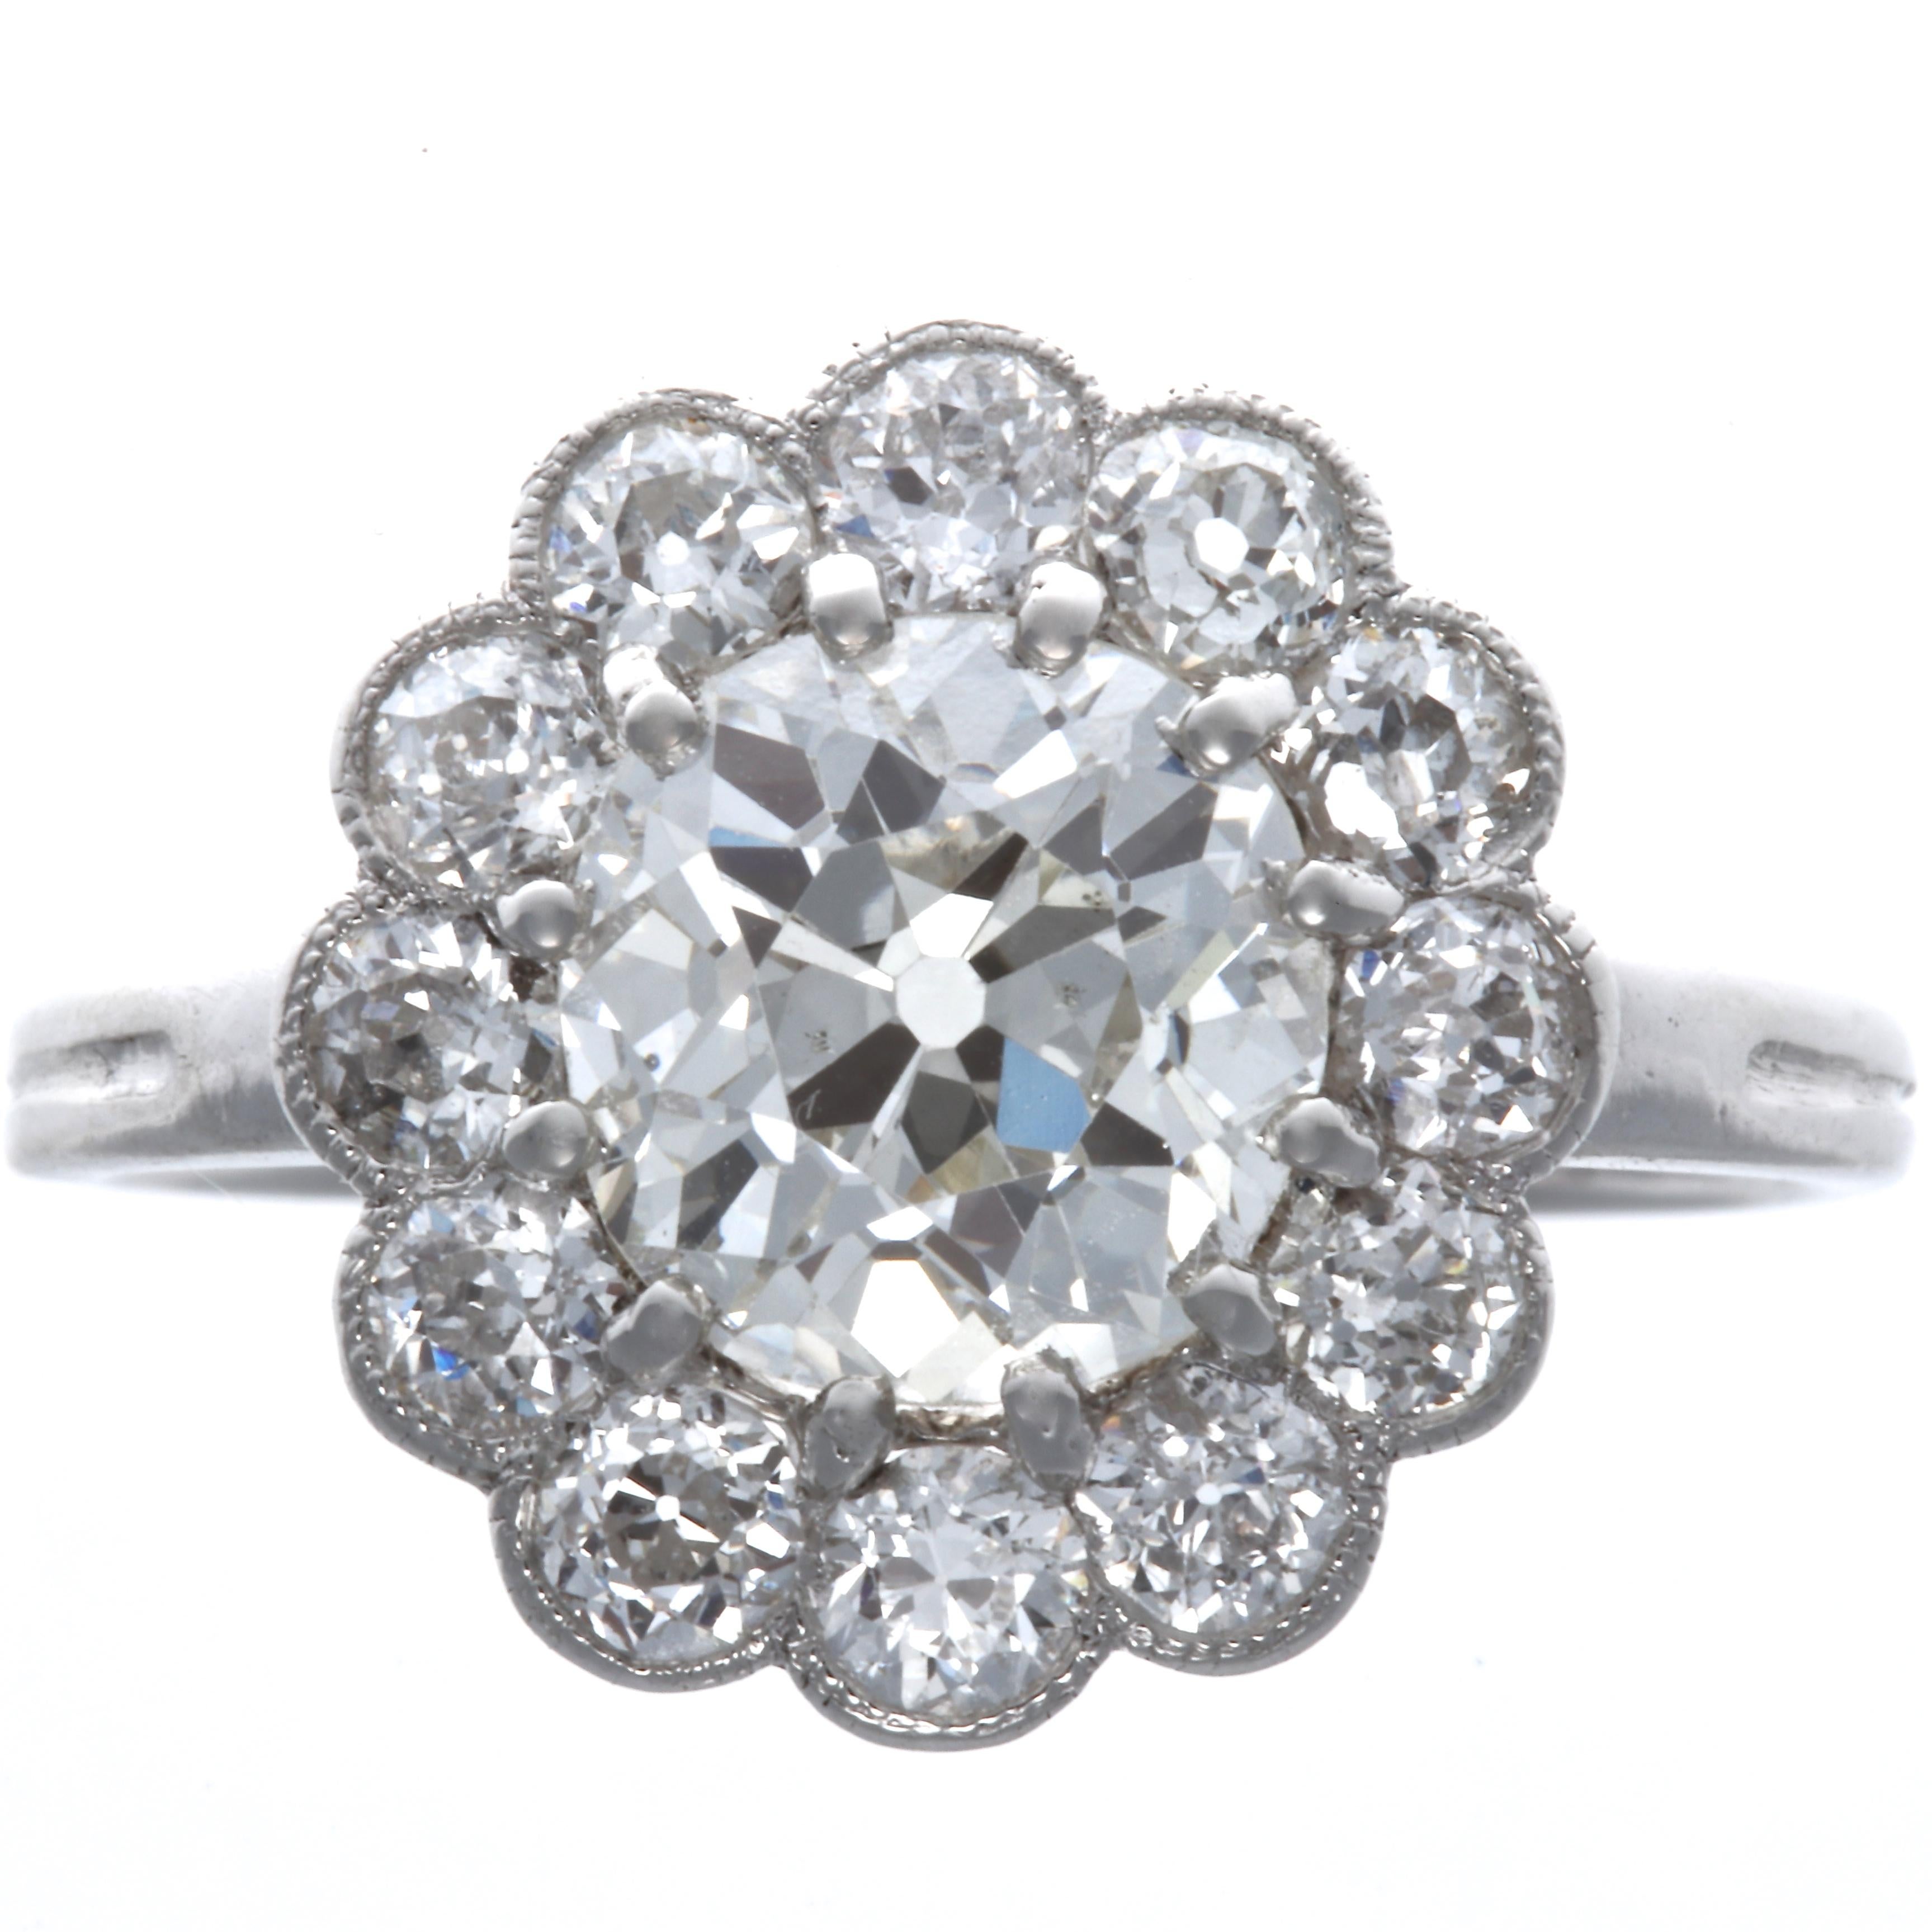 From a time long ago and a place far away comes this fragrant flower, still as fresh as todays bouquet. The Old European cut 1.73 carat is GIA certified as J color SI1 clarity. Accented by 2 Old European cut  diamonds weighing approximately 0.75